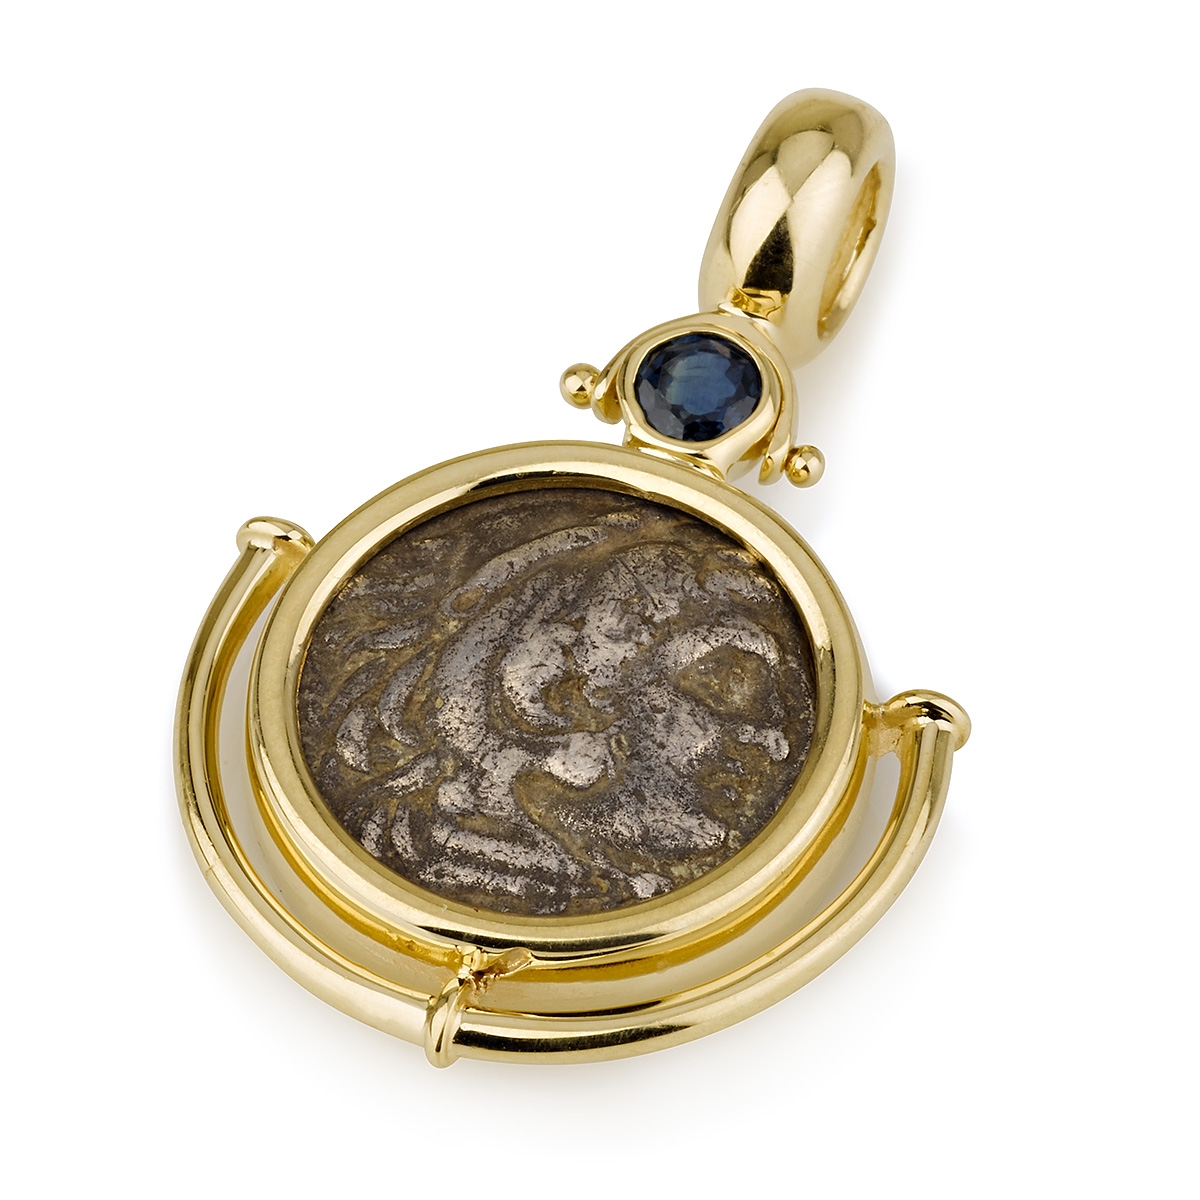 Ben Jewelry 14K Gold, Sapphire, and Greek Silver Drachma Alexander the Great 336-323 BC Coin Pendant - 1